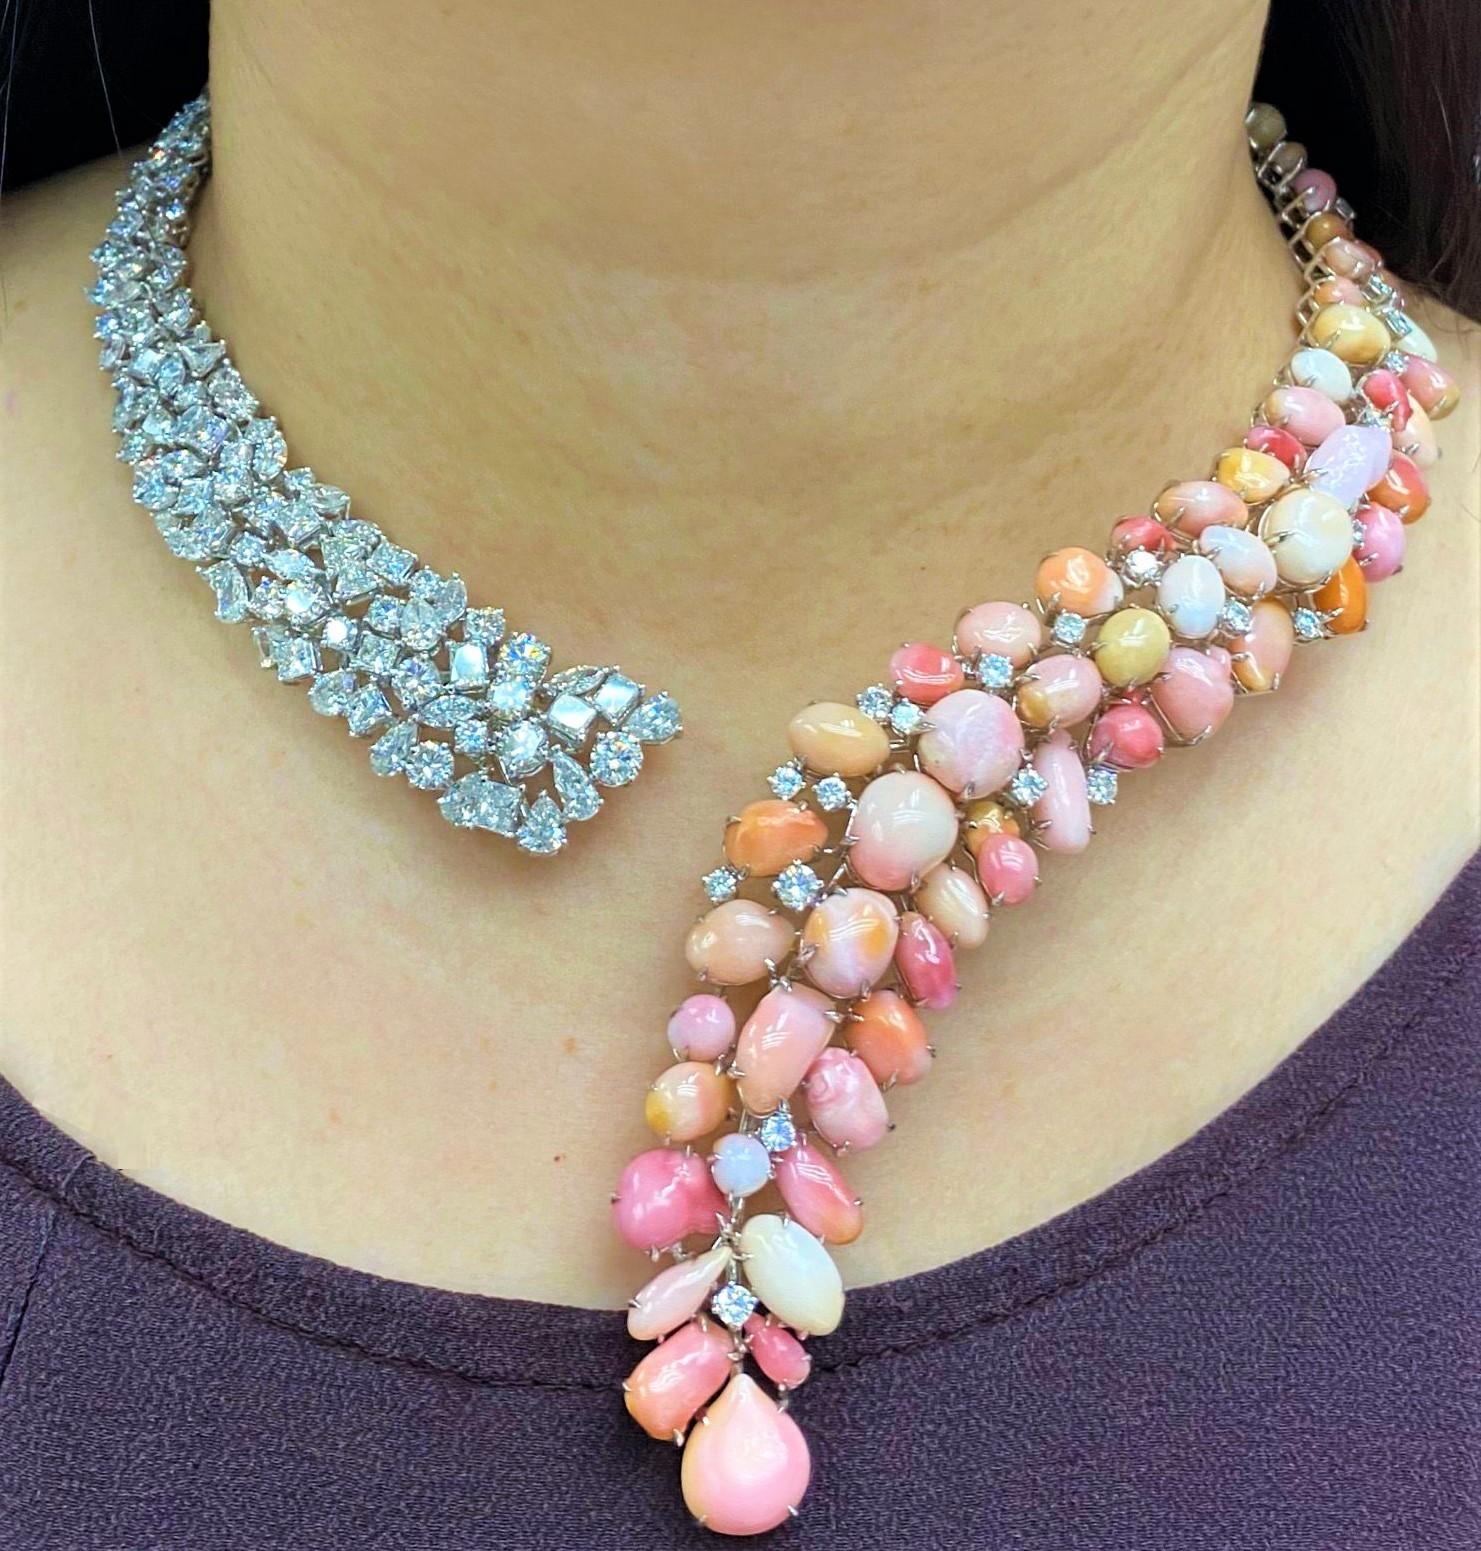 The Following Item we are Offering is this Magnificent 18KT Gold Large Extremely Rare Conch Pearl and Fancy Diamond Necklace. This Gorgeous Necklace features Large Gorgeous Conch Pearls with Shades of Oranges and Pinks. Beautifully done with a